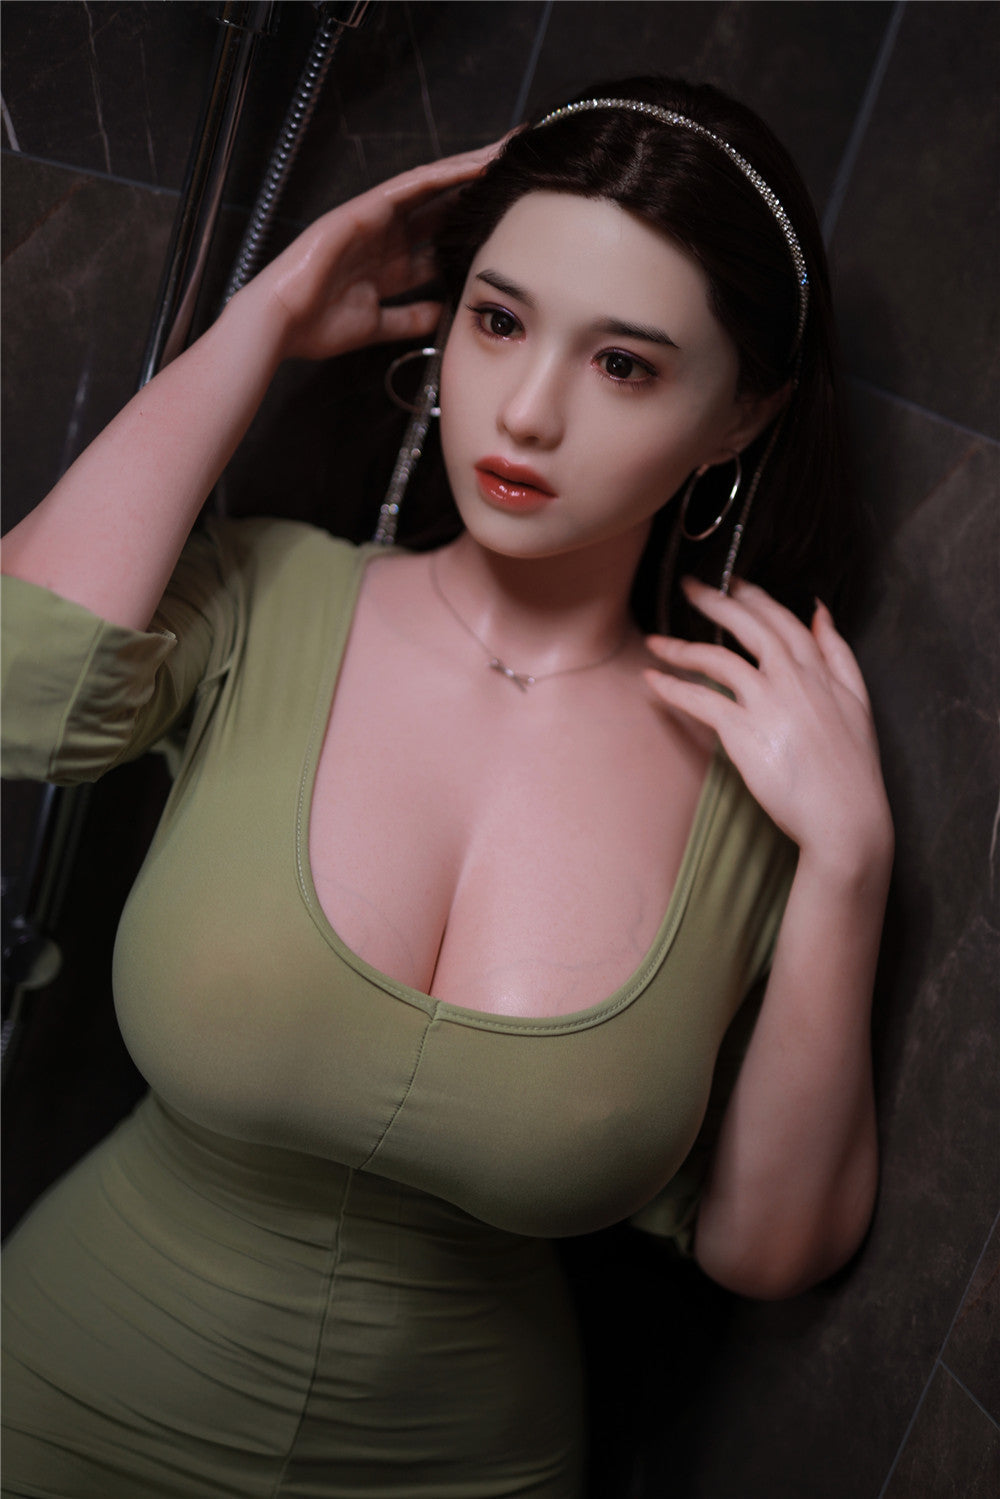 JY Doll 162 cm Silicone - Iris | Buy Sex Dolls at DOLLS ACTUALLY